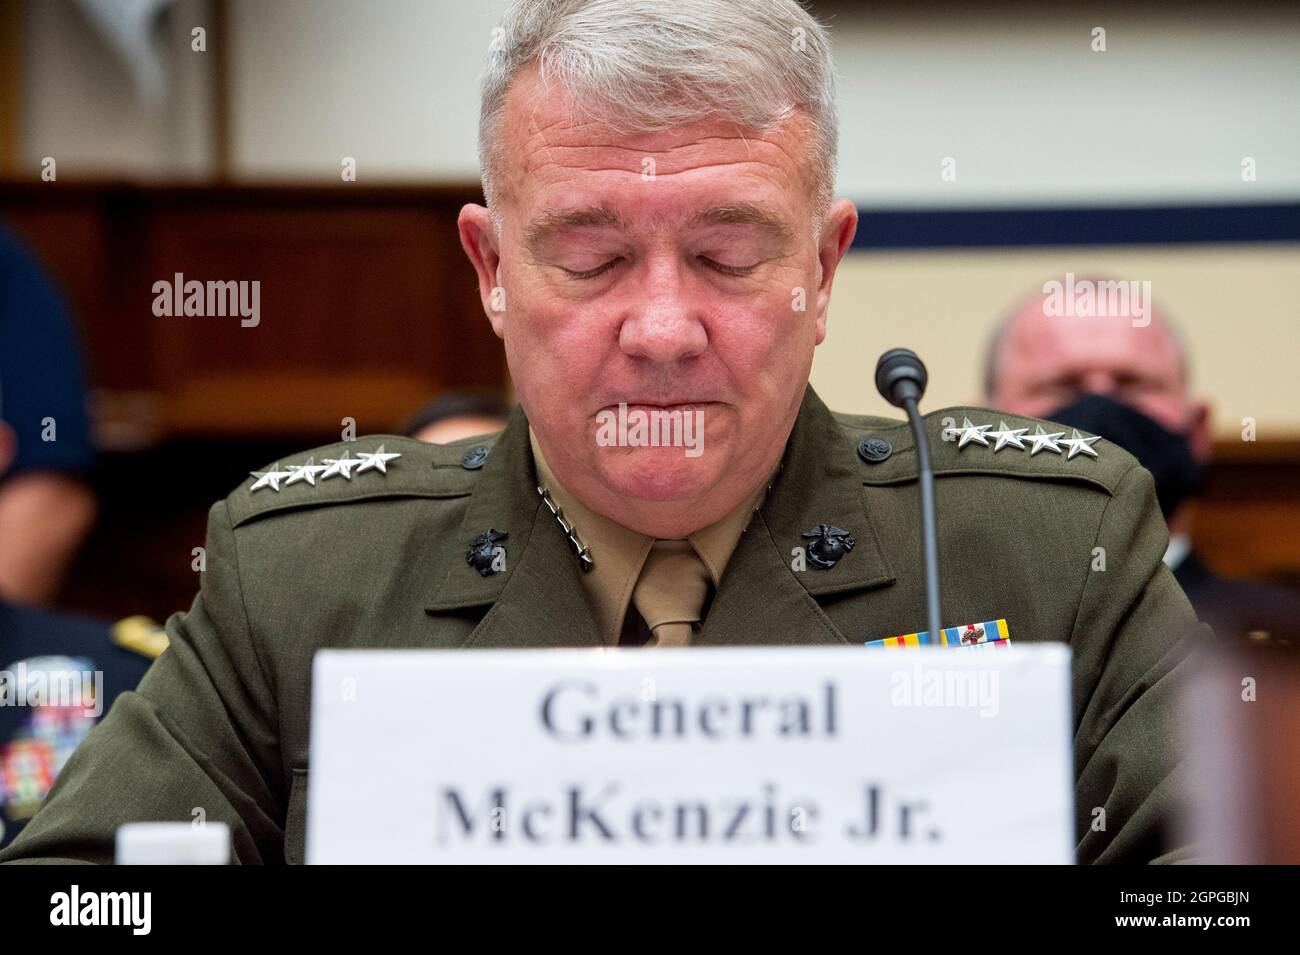 General Kenneth McKenzie Jr., USMC Commander, U.S. Central Command responds to questions during a House Armed Services Committee hearing on “Ending the U.S. Military Mission in Afghanistan” in the Rayburn House Office Building in Washington, DC, Wednesday, September 29, 2021. (Photo by  Rod Lamkey/Pool/Sipa USA) Stock Photo